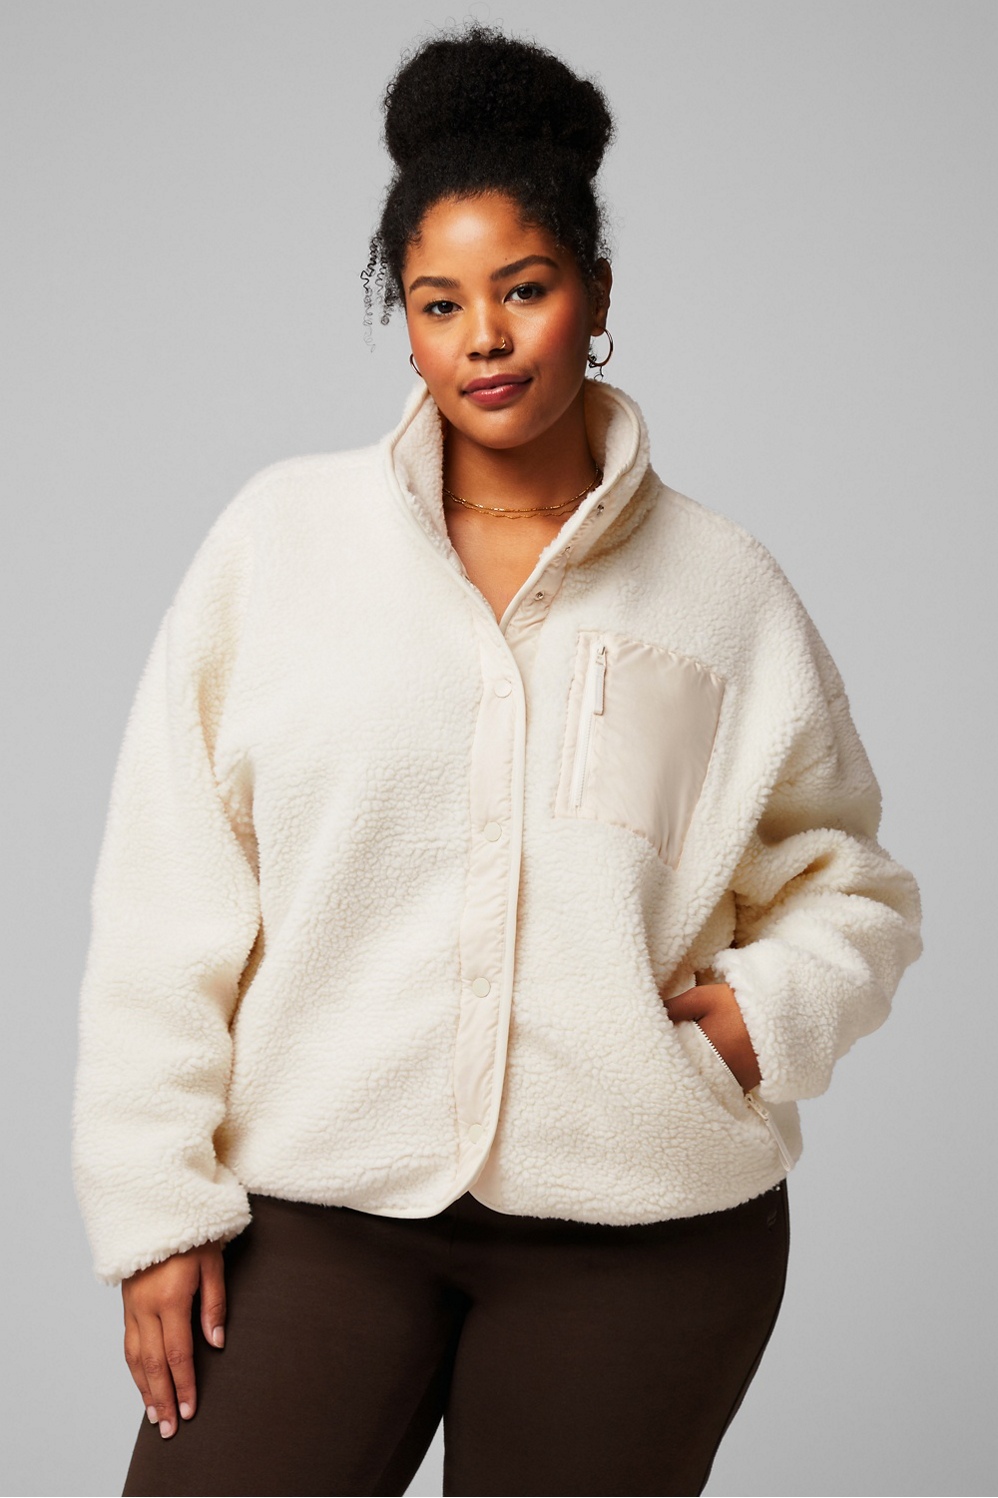 Fabletics Summit Sherpa Teddy Jacket Hooded 1X New in Package - $63 New  With Tags - From Foxy